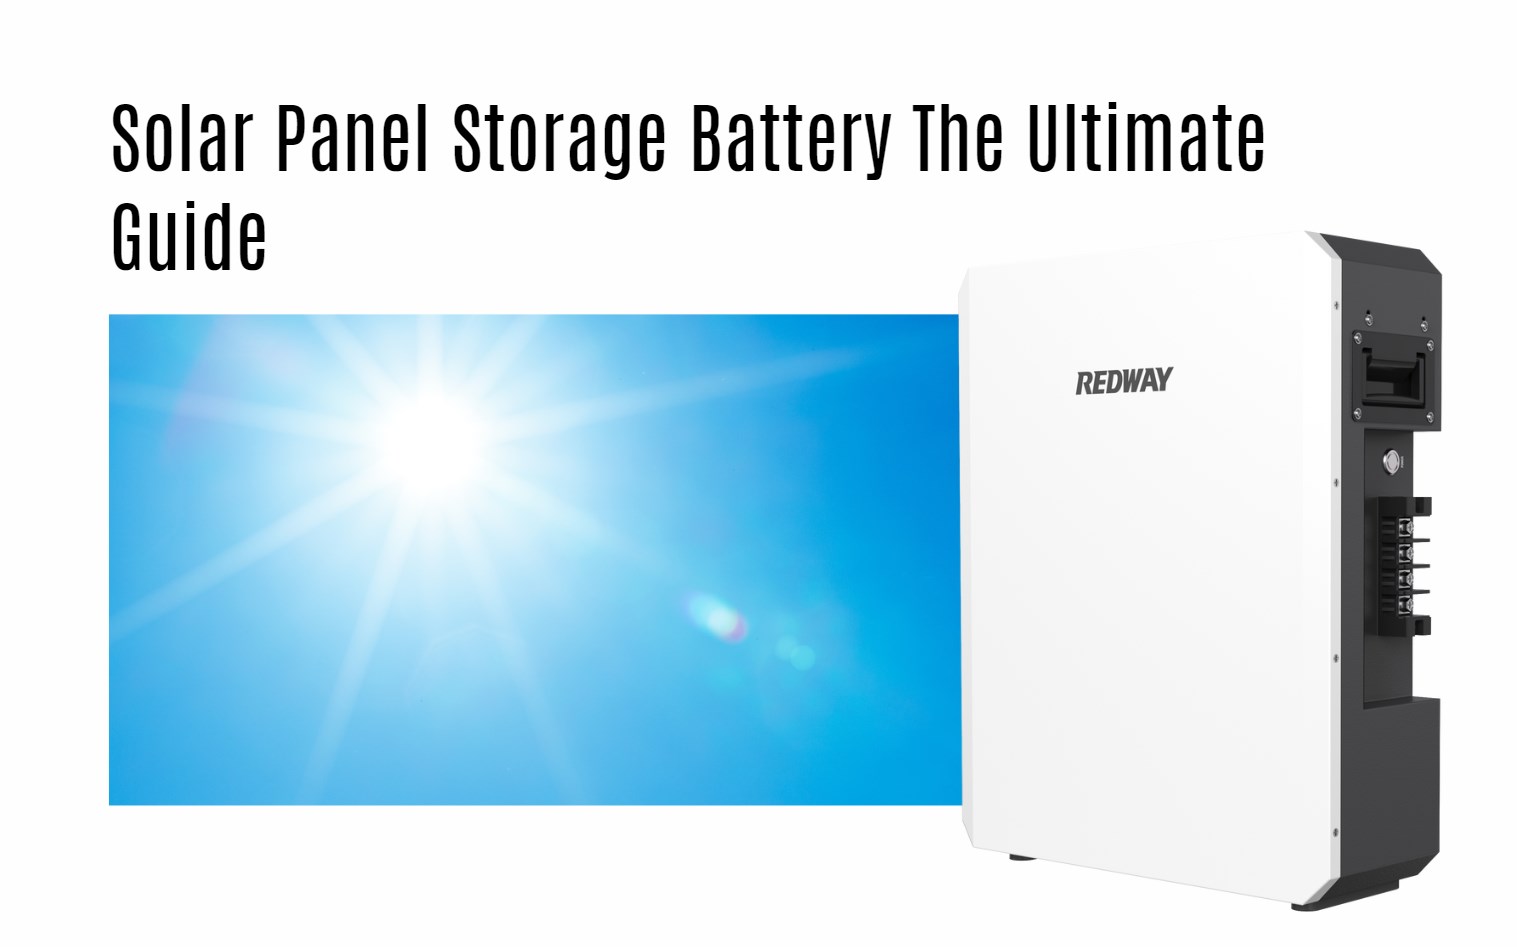 Solar Panel Storage Battery The Ultimate Guide. 5kwh 48v 100ah powerwall home ess lithium battery factory oem wall-mounted